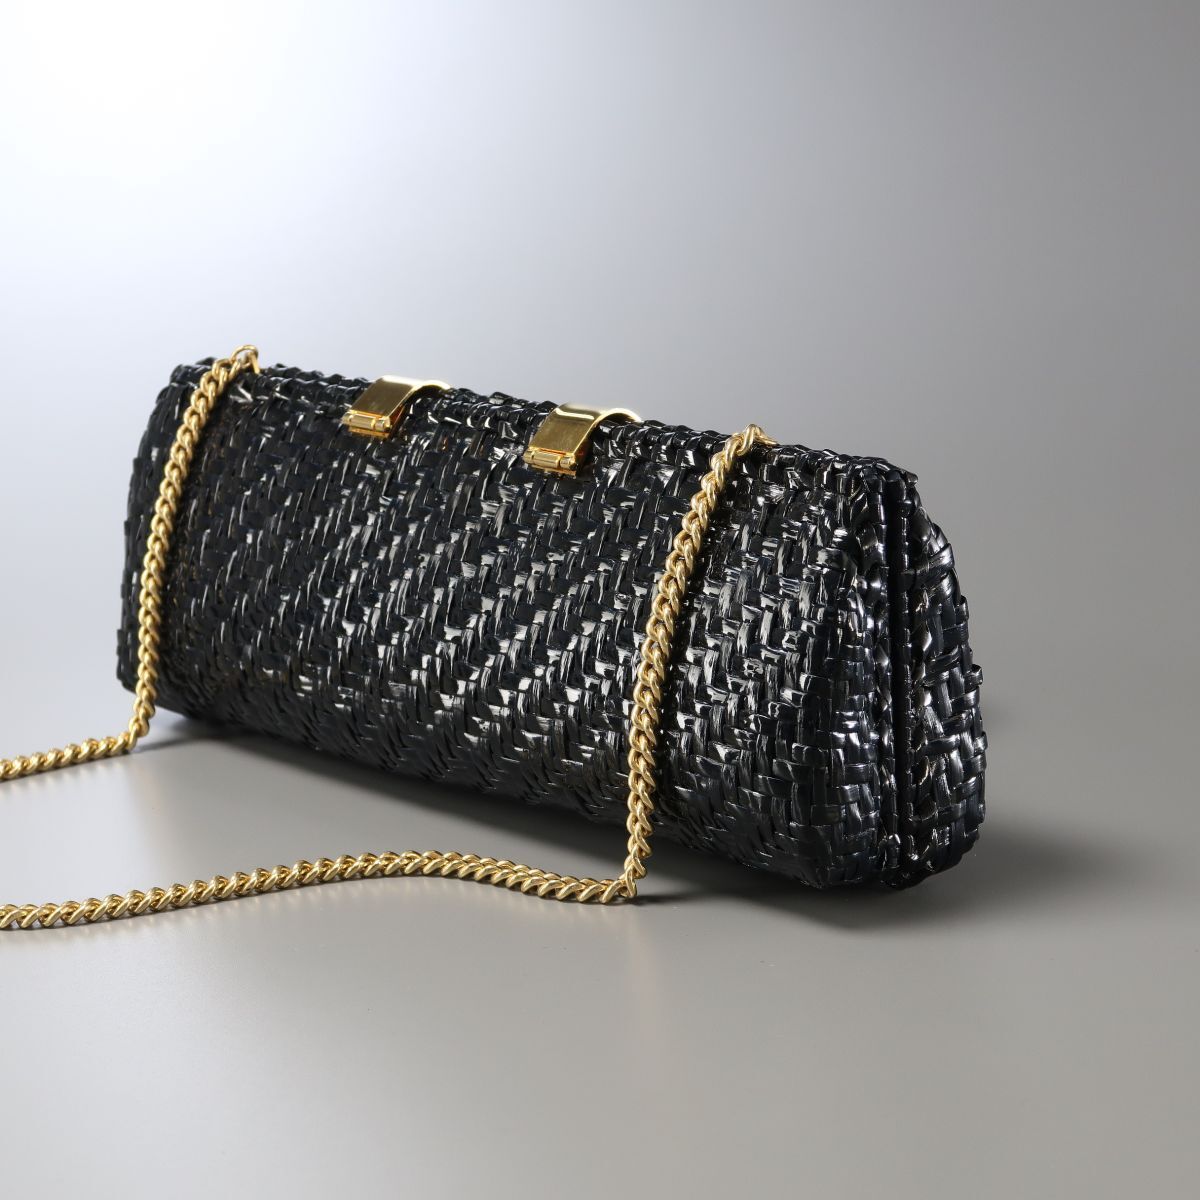 MG0627^ Italy made Cesare Piccini/ che The -re pitch -ni rattan rattan knitting basket bag party bag / clutch / chain bag bag 